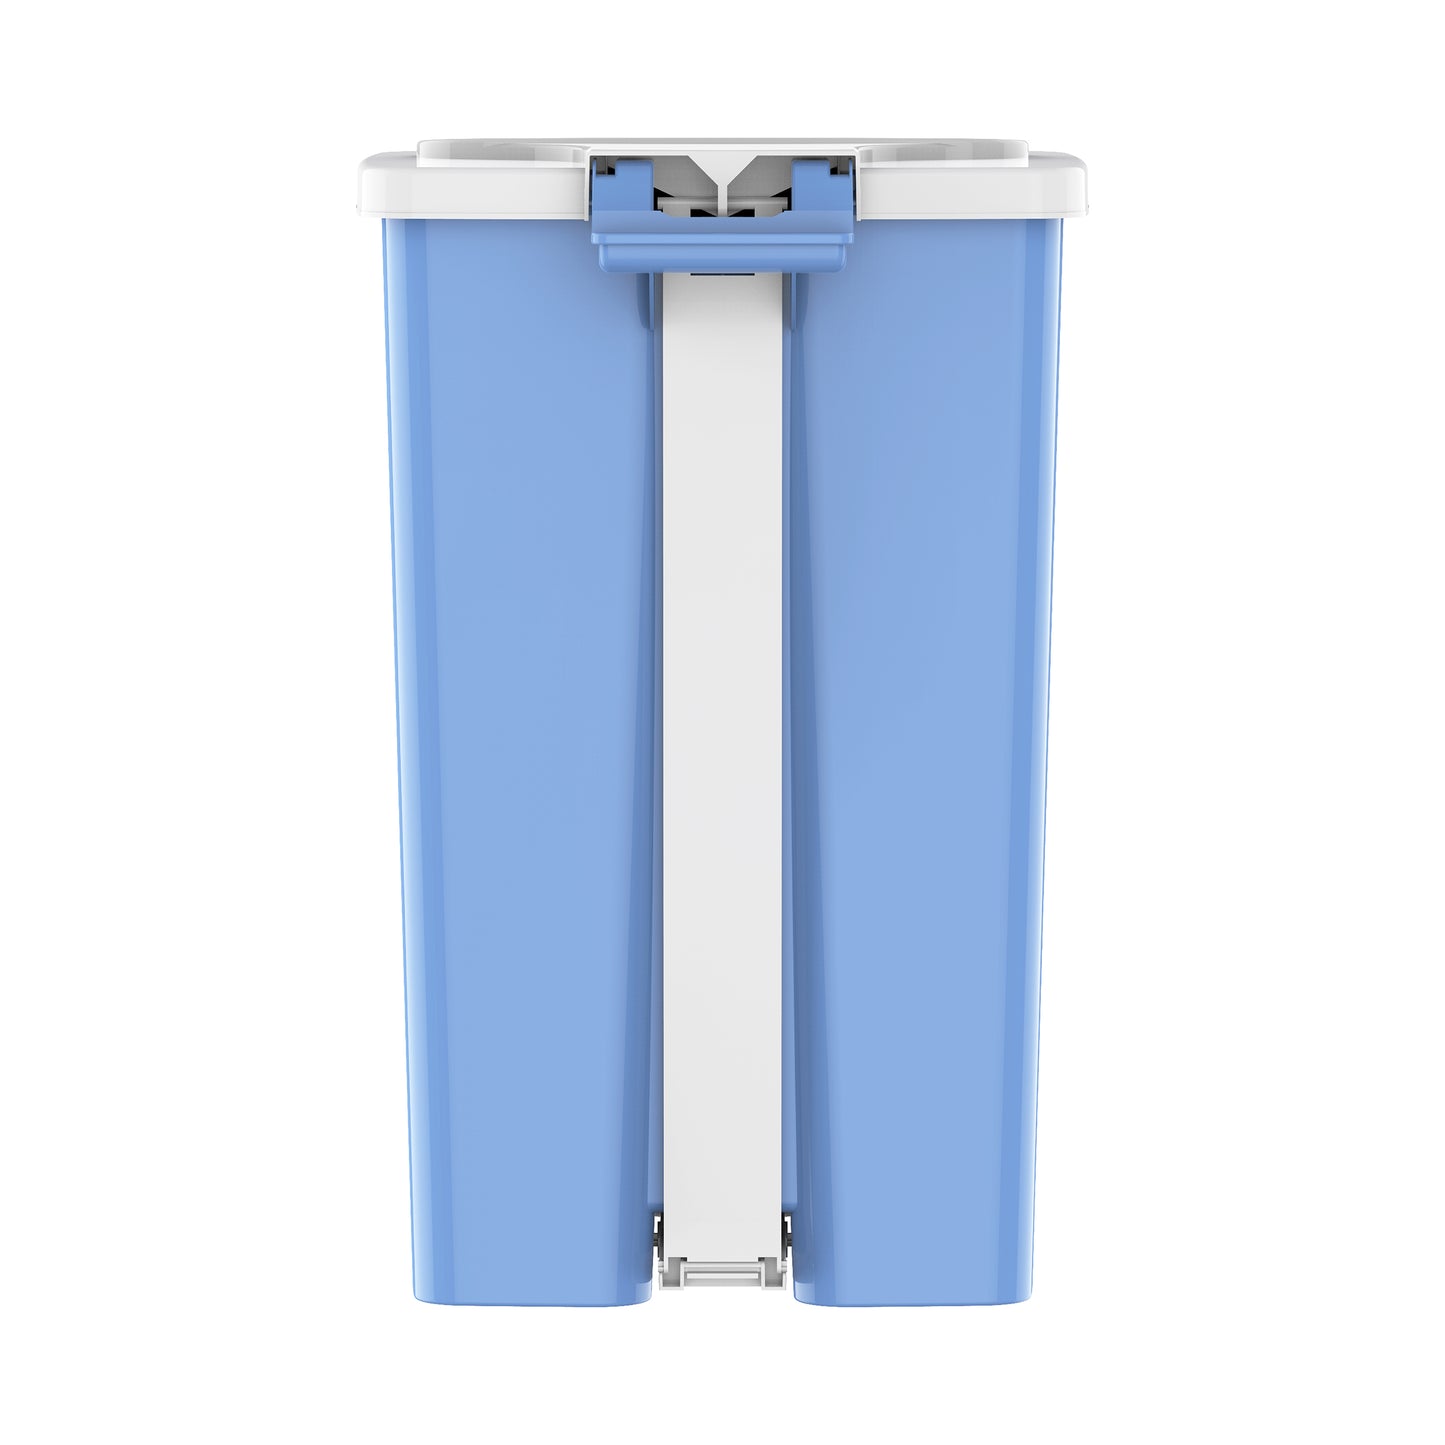 44L Step-on Waste Bin with Pedal